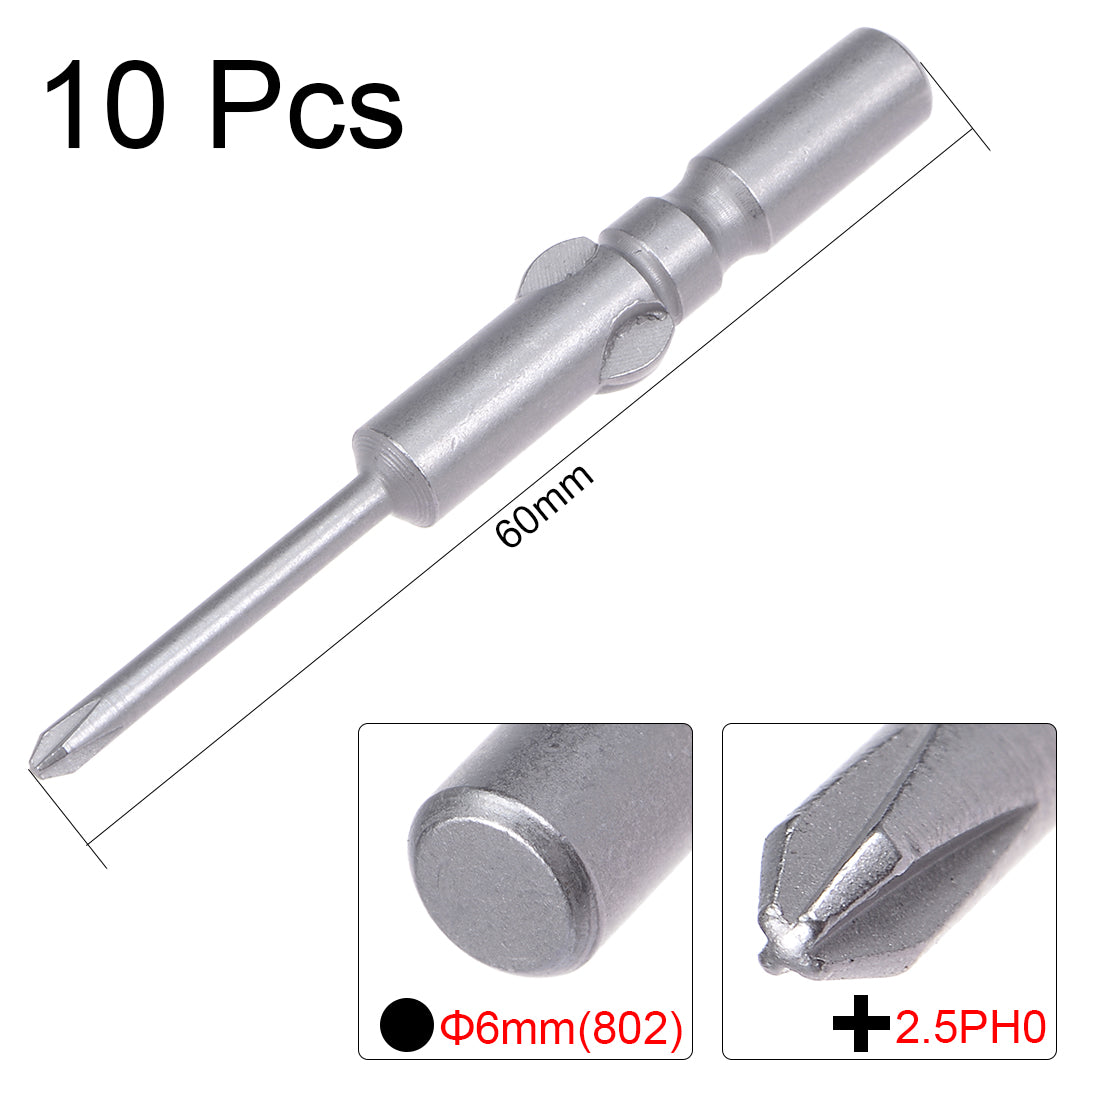 Uxcell Uxcell 10 Pcs 4mm Shank 80mm Length 2mm Phillips PH0 Magnetic S2 Screwdriver Bits